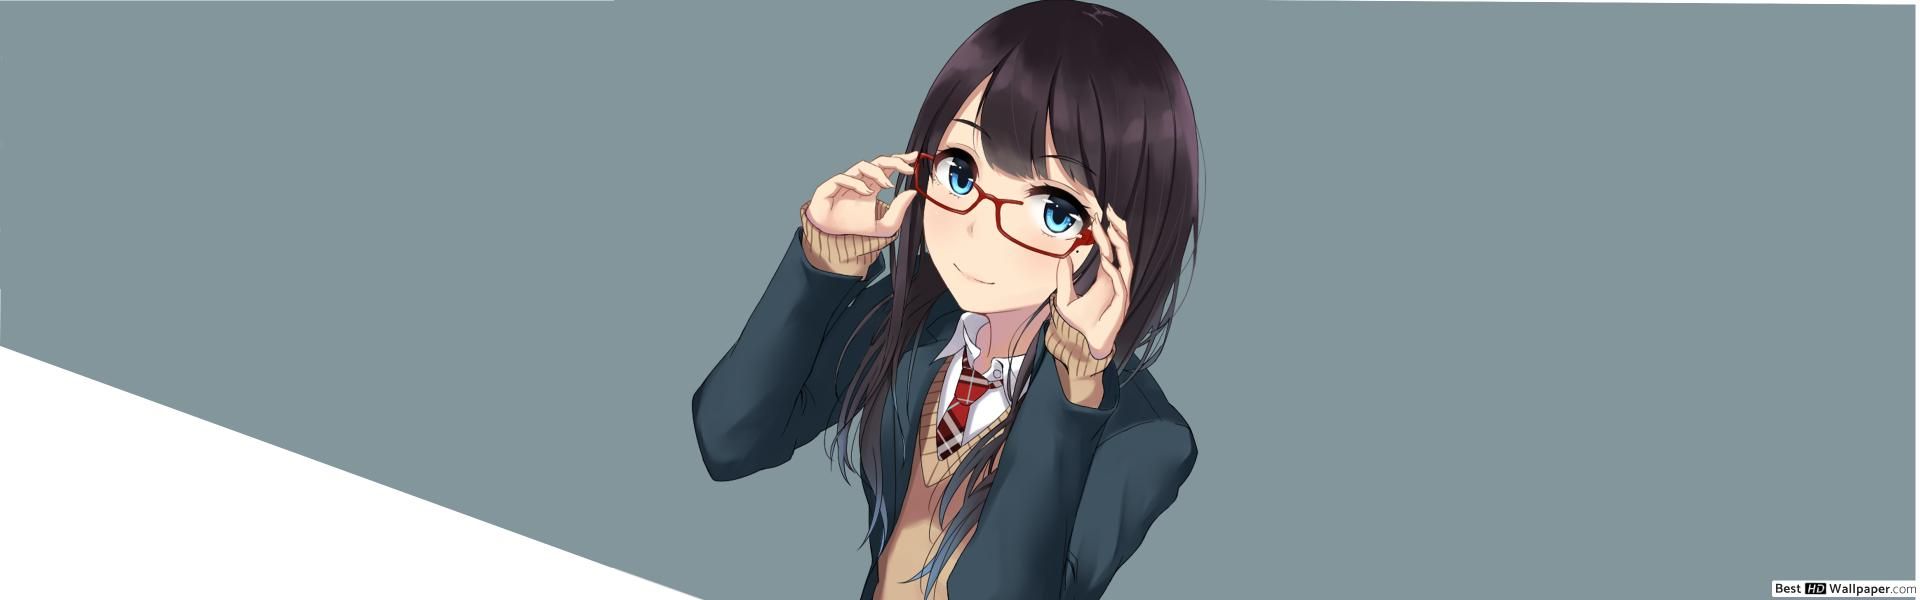 Anime Girl with Glasses HD wallpaper download